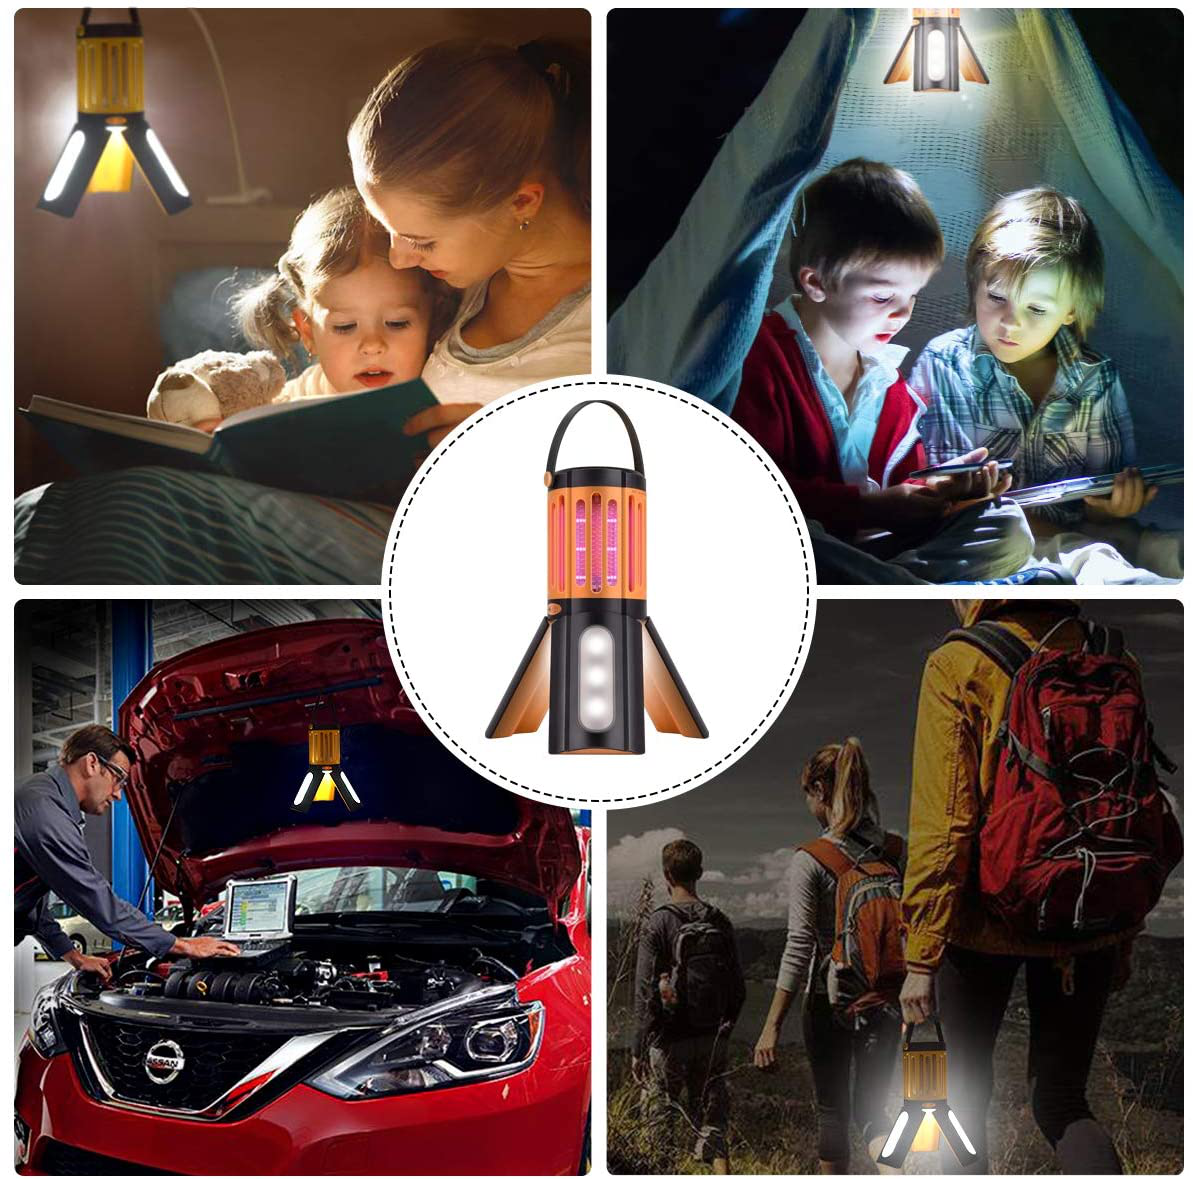 LED Camping Lantern Bug Zapper 2 in 1,Tripod Tent Light with Hook Portable Indoor Outdoor Mosquito Killer Fly Zappers Waterproof Compact UV Insect Trap Lamp